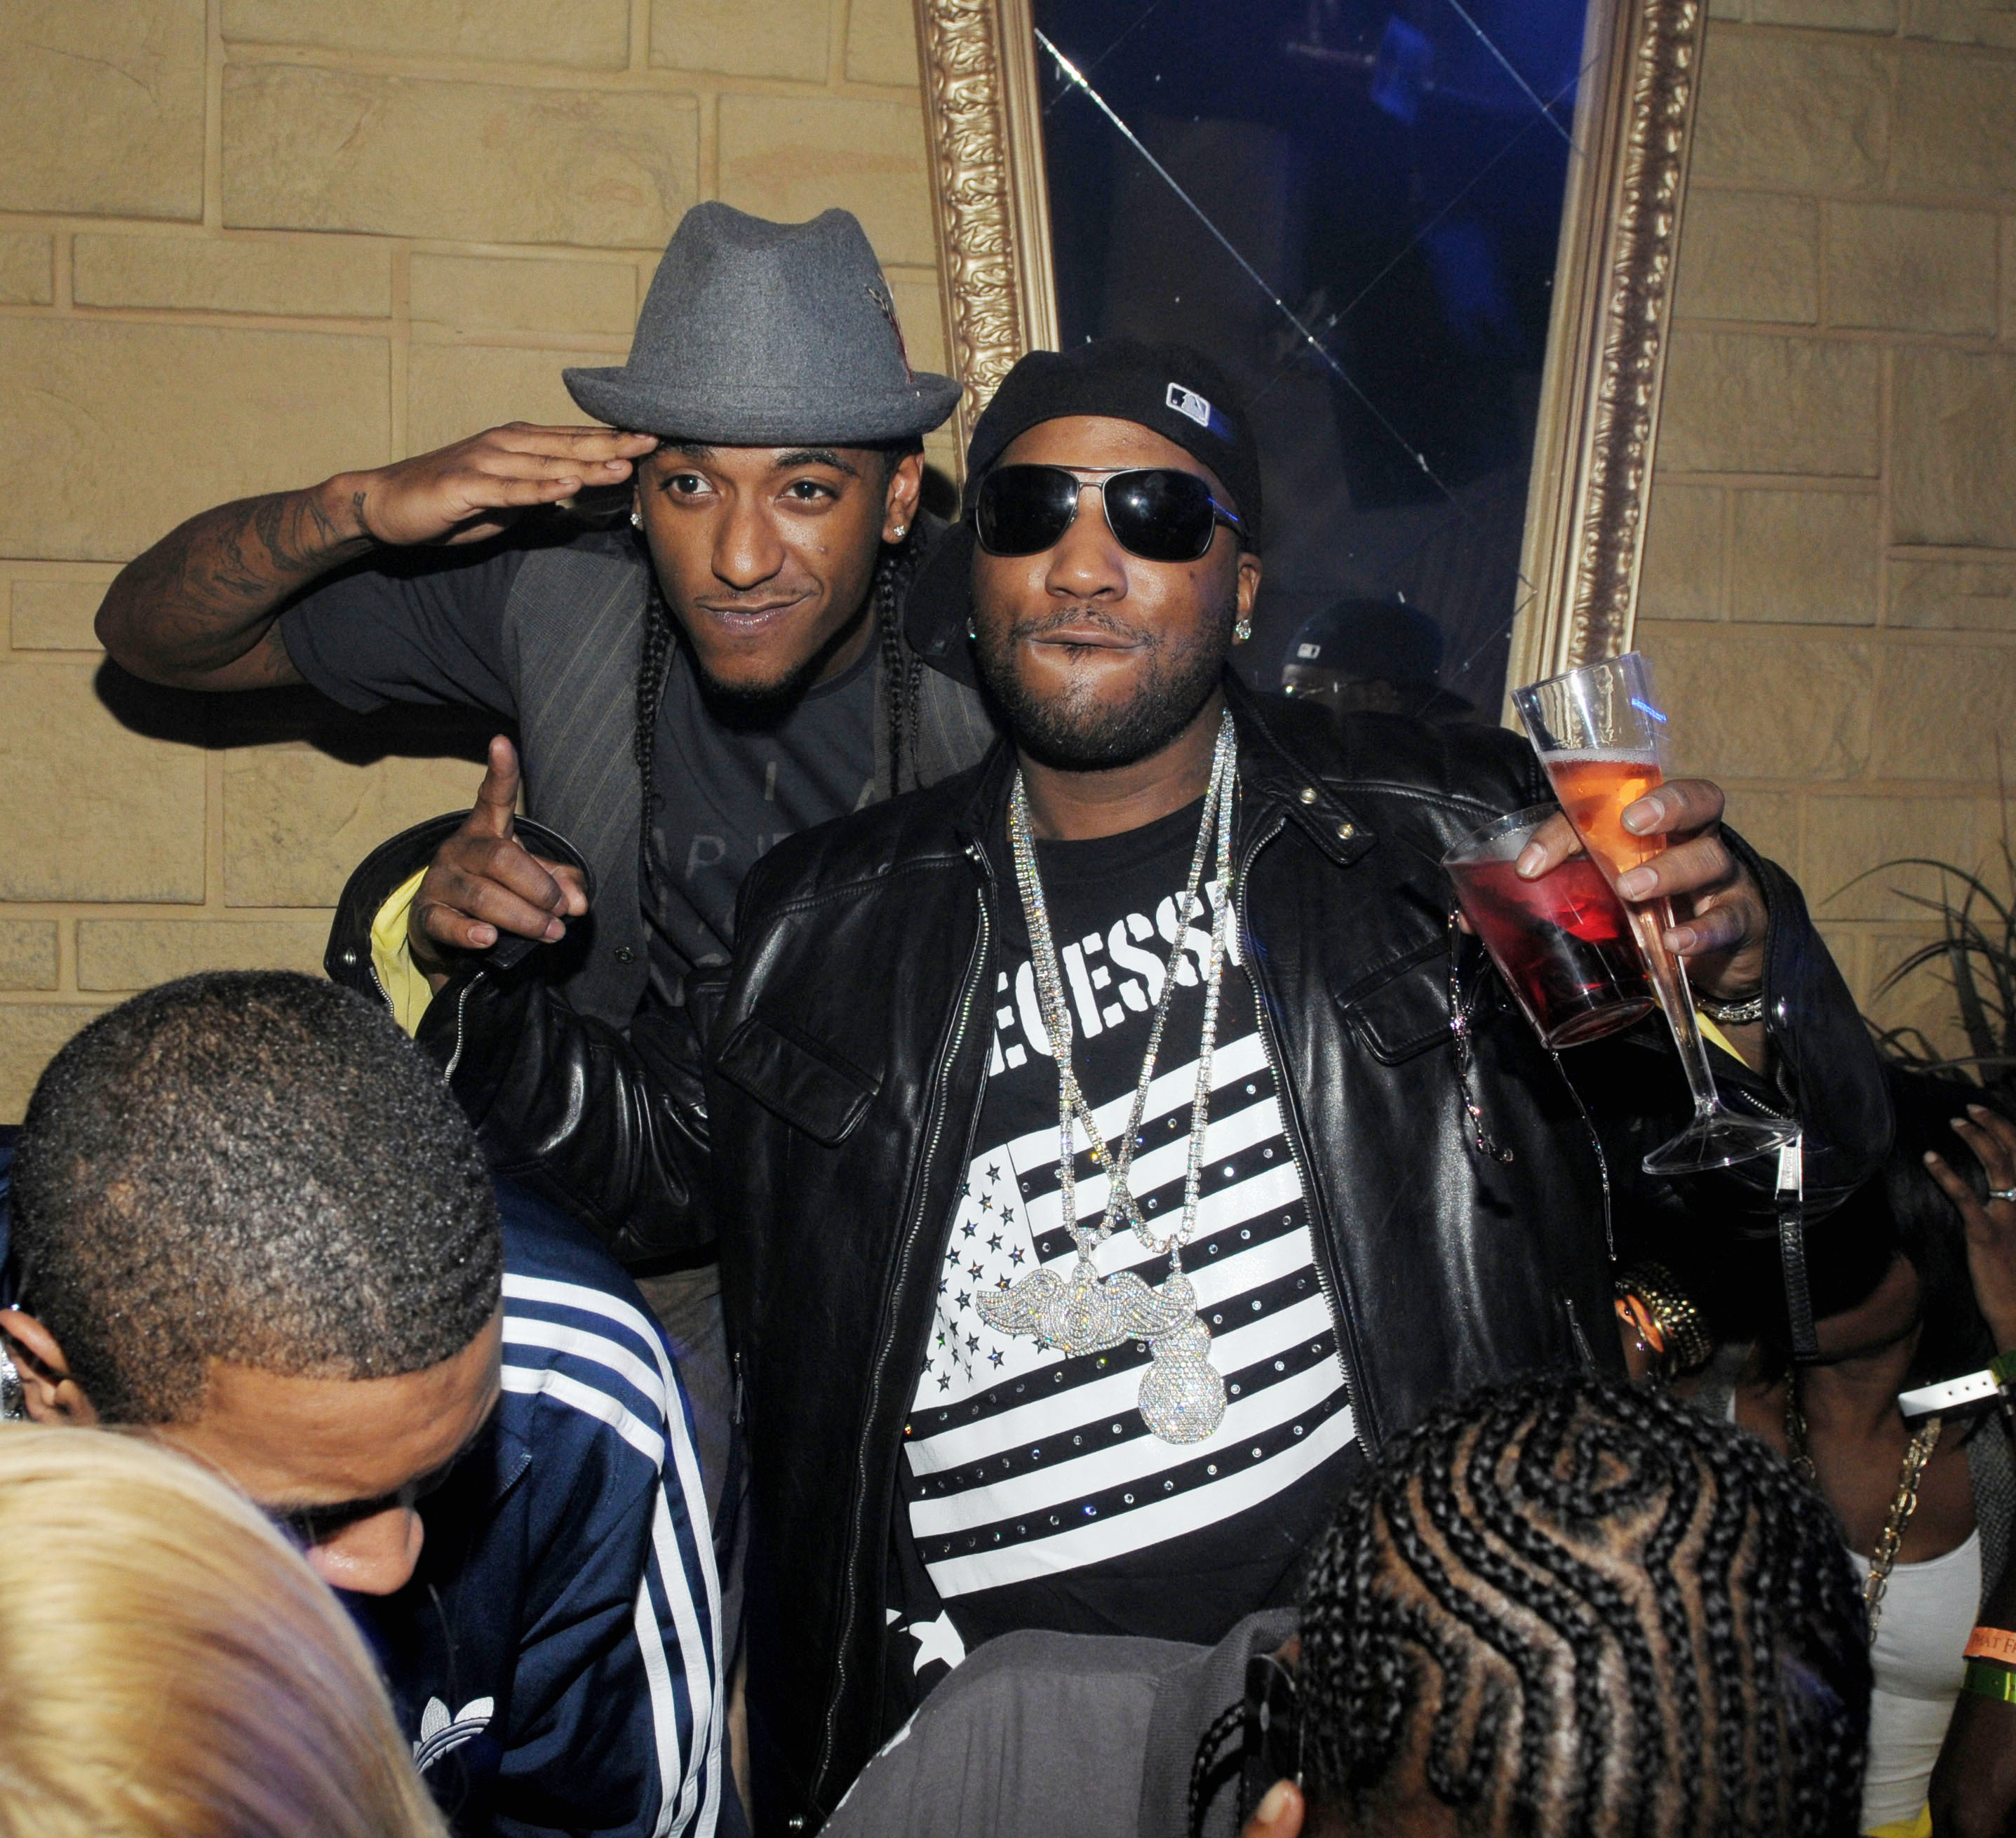 Lloyd and Young Jeezy Club Sobe Live afterparty for the Live Your Life concert tour farewell hosted by Lloyd and Young Jeezy - afterparty Miami, Florida - 27.02.09 Featuring: Lloyd and Young Jeezy Where: Miami, Florida, United States When: 27 Feb 2009 Credit: Johnny Louis/WENN.com